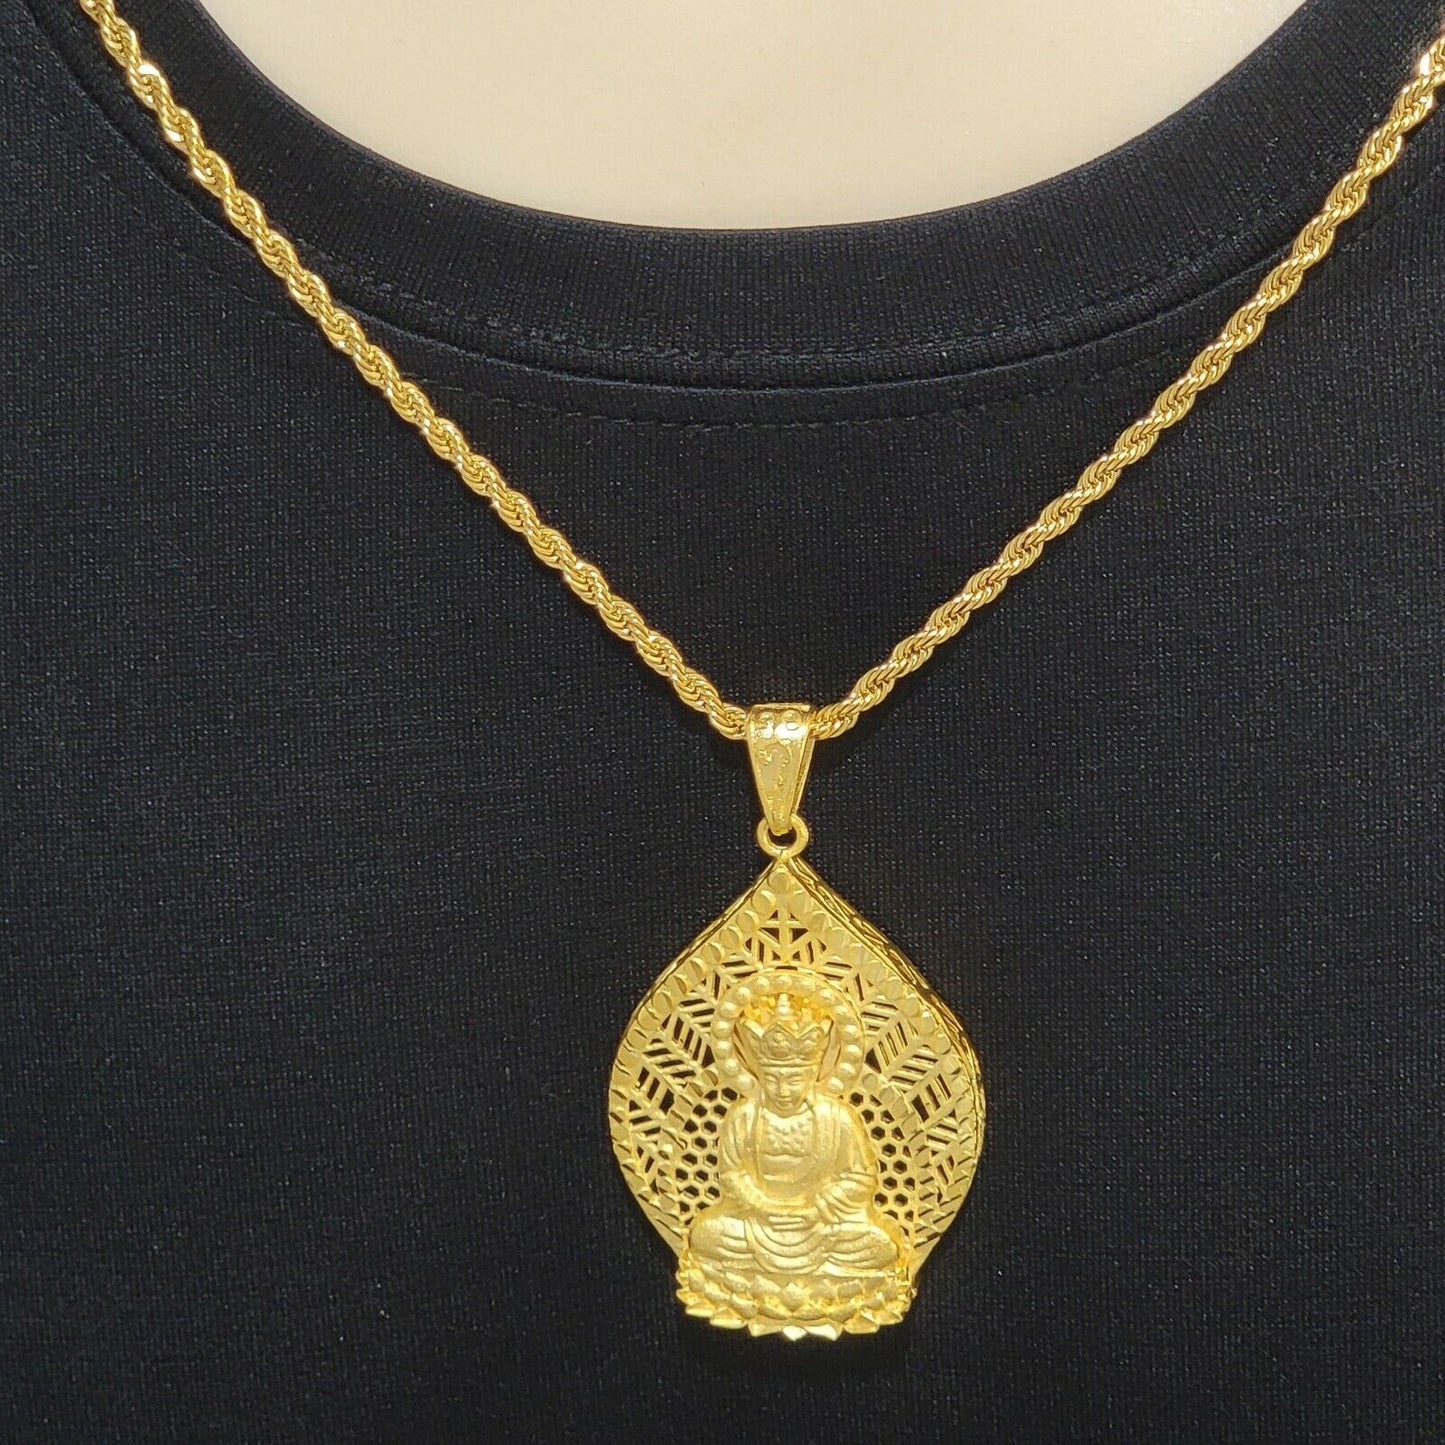 Necklaces - Stainless Steel Gold Plated. Buddha Pendant & Chain.